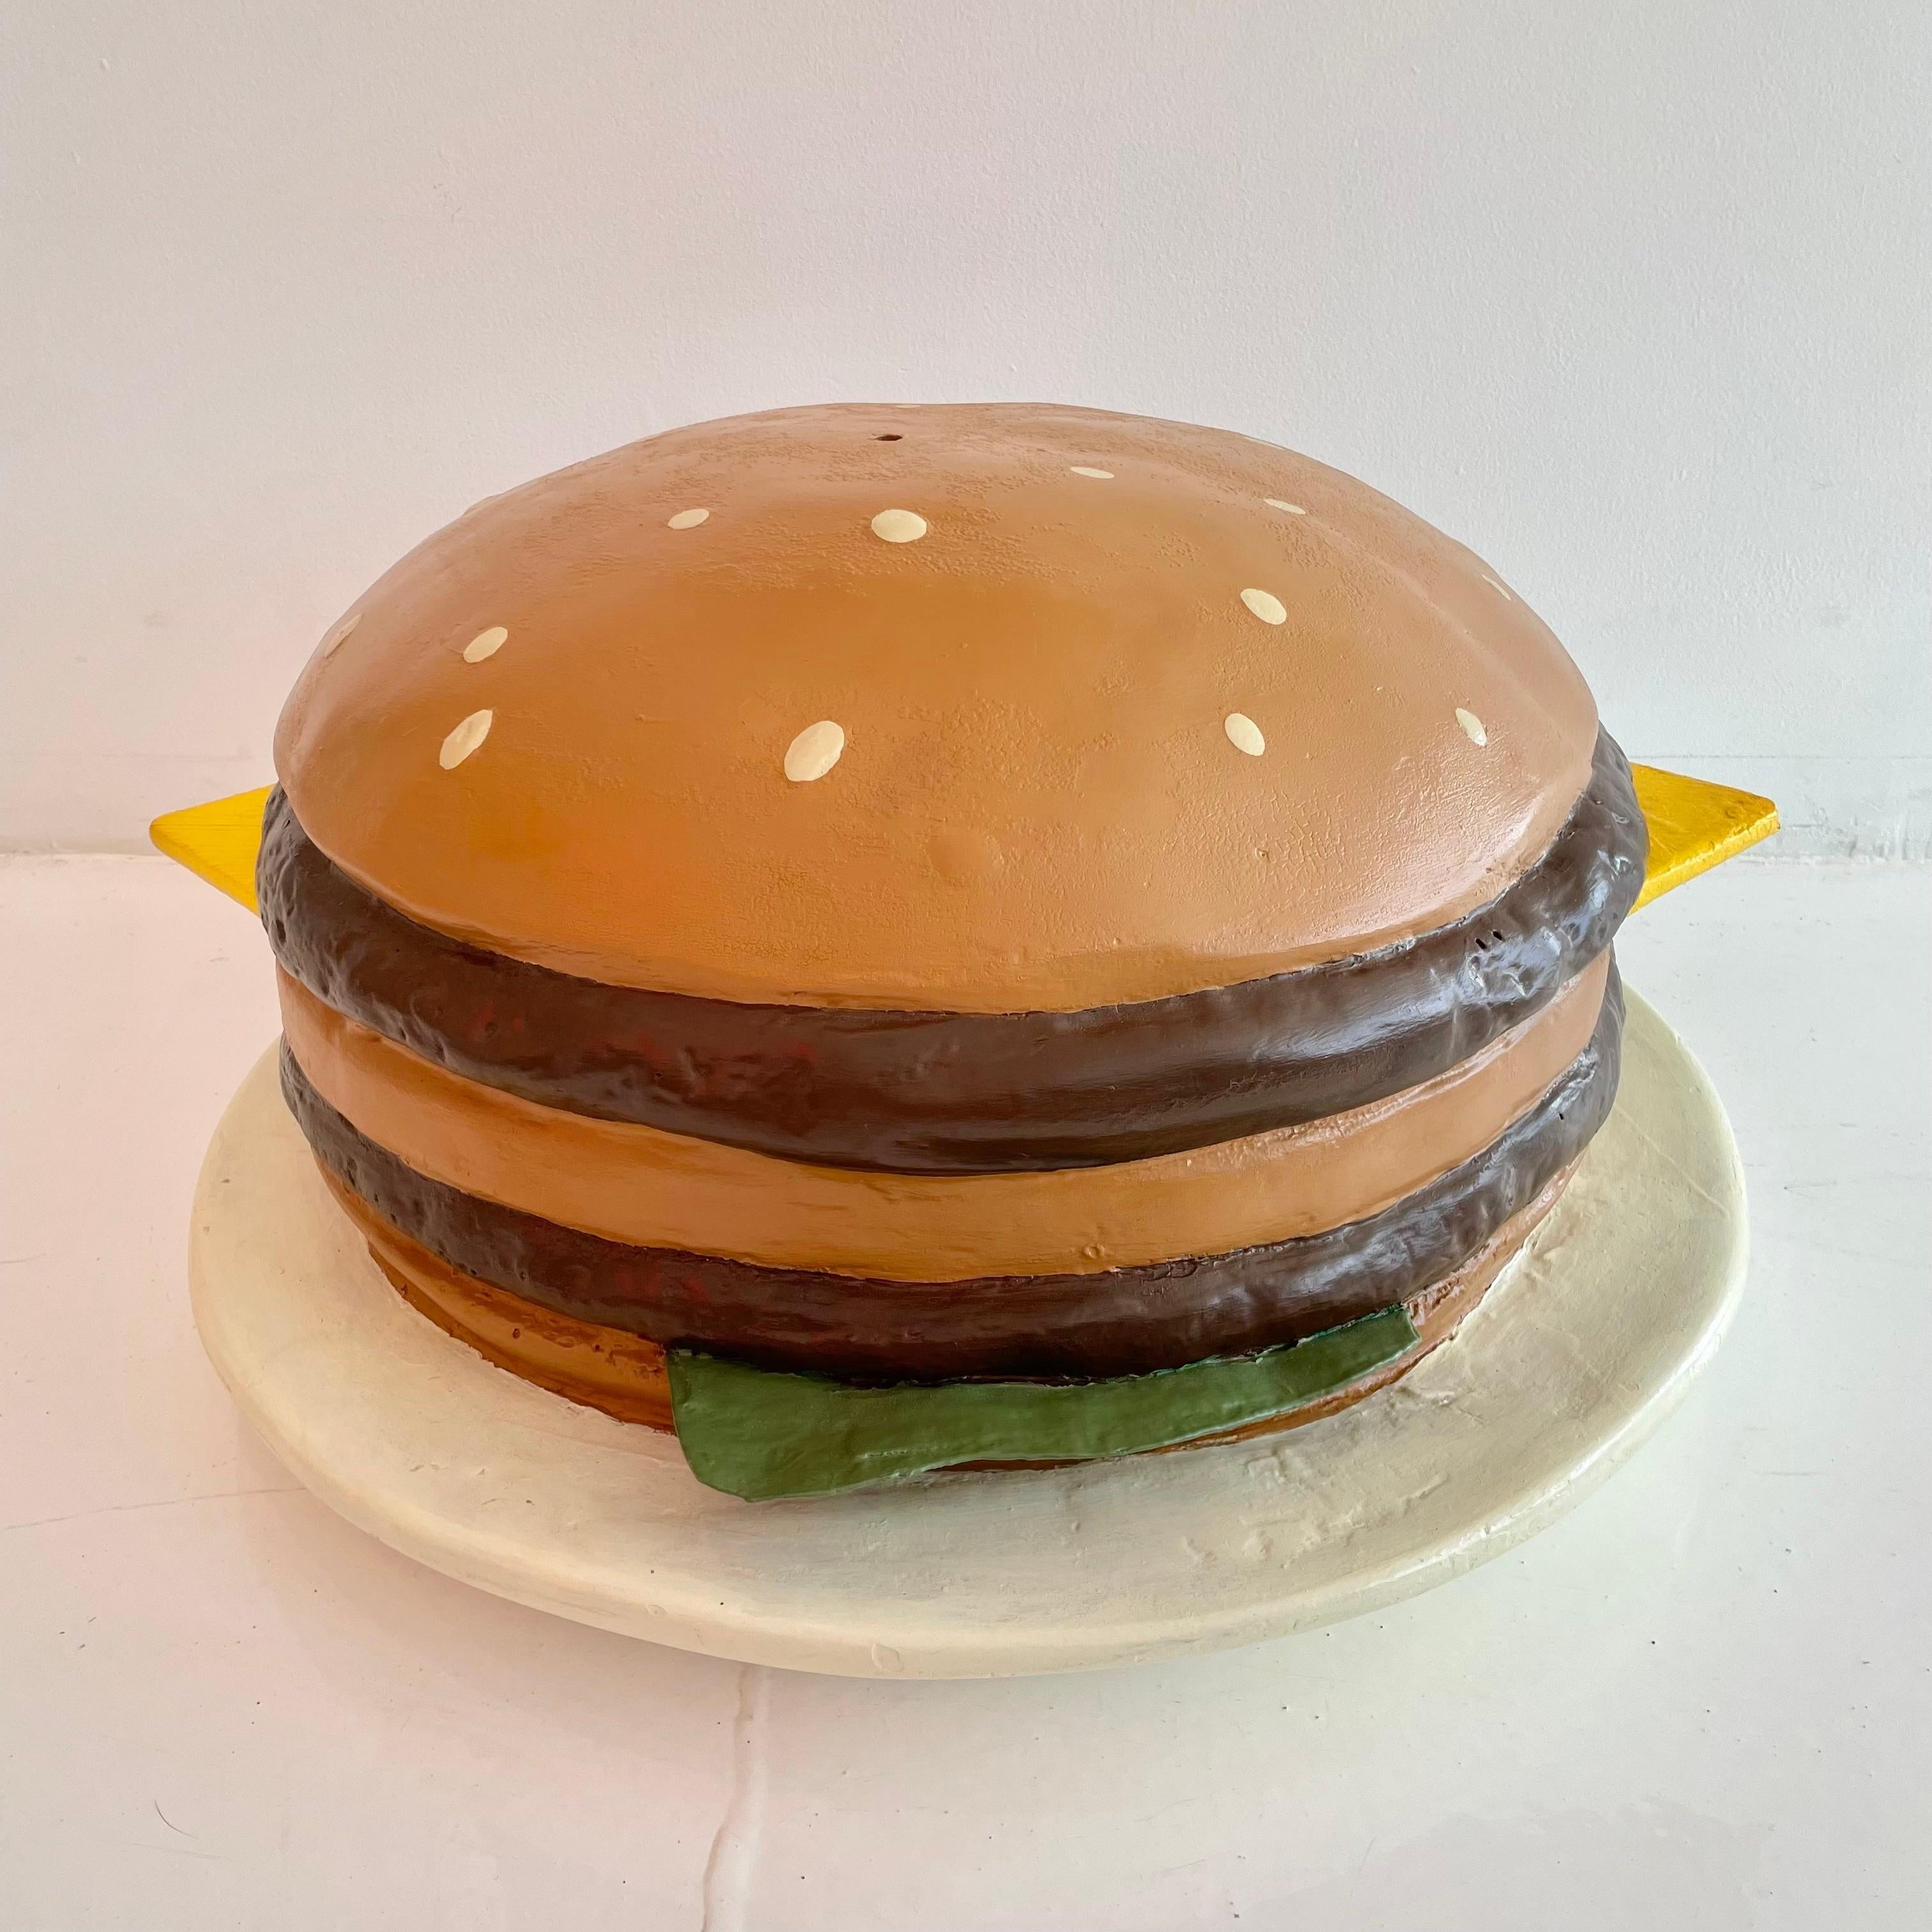 Oversized vintage cheeseburger pop art in fiberglass. Likely used as a store display. Hand made in fiberglass and hand painted with great detail. Triple layer bun, two hamburger patties, cheese and lettuce sitting atop a white plate. Bright and eye